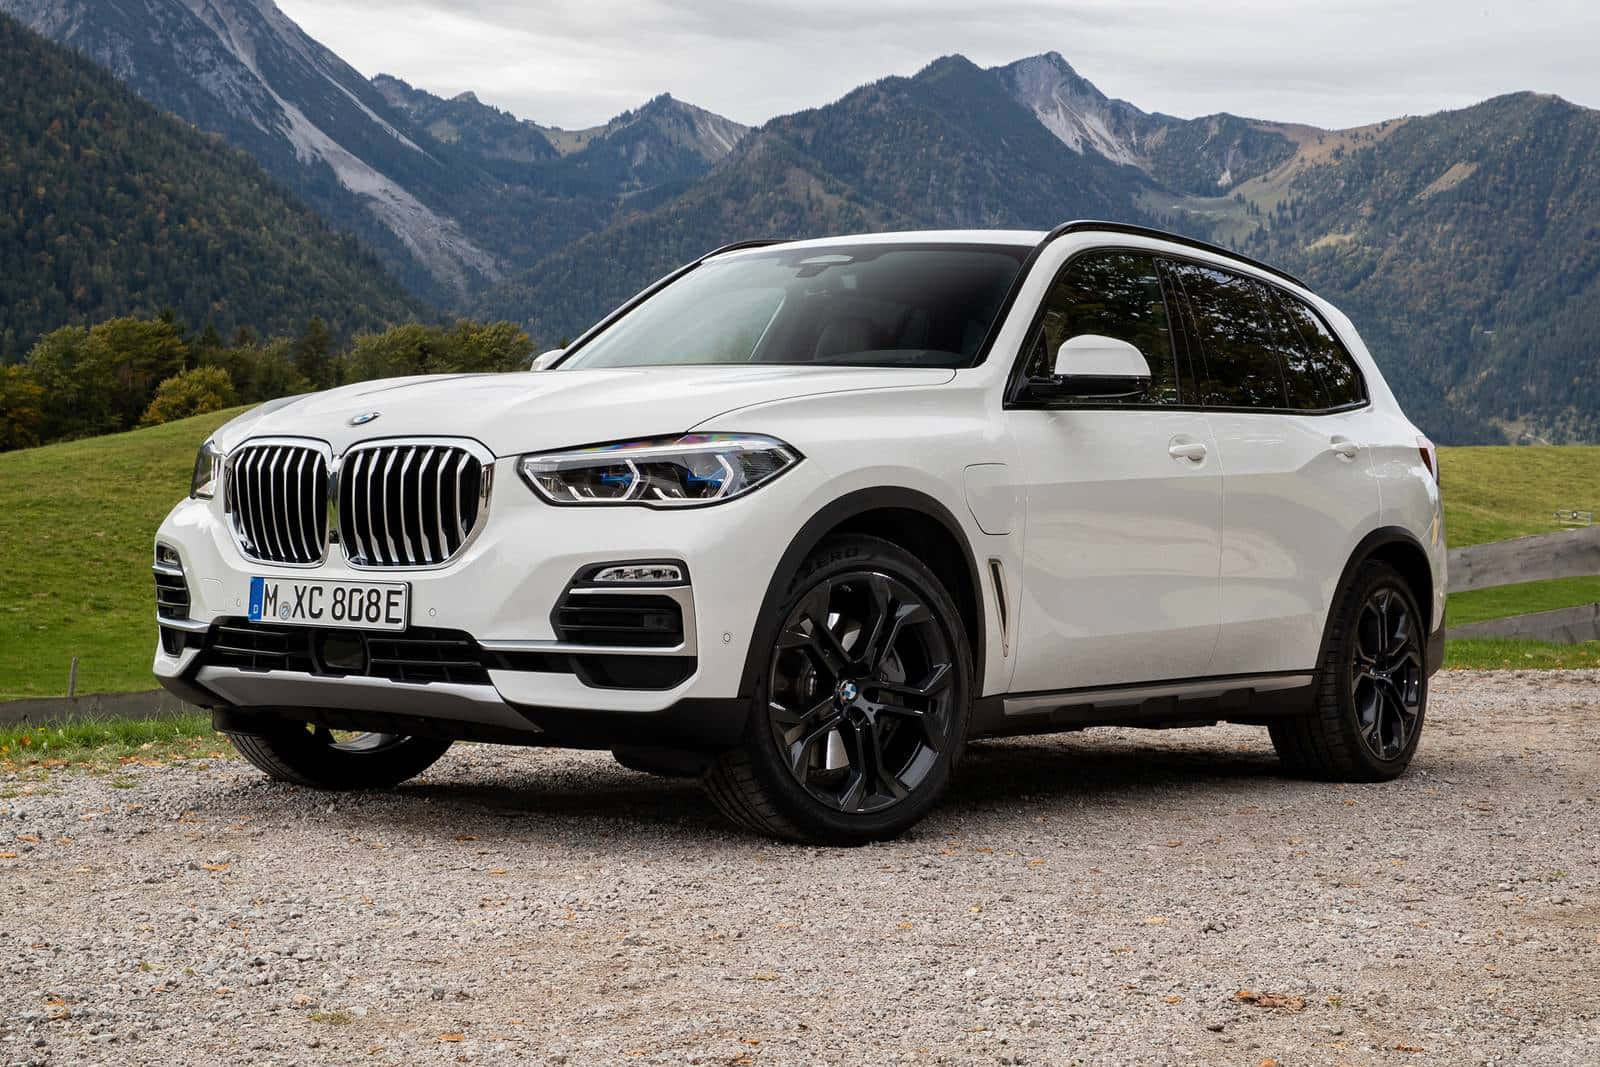 Captivating BMW X5 in Action Wallpaper